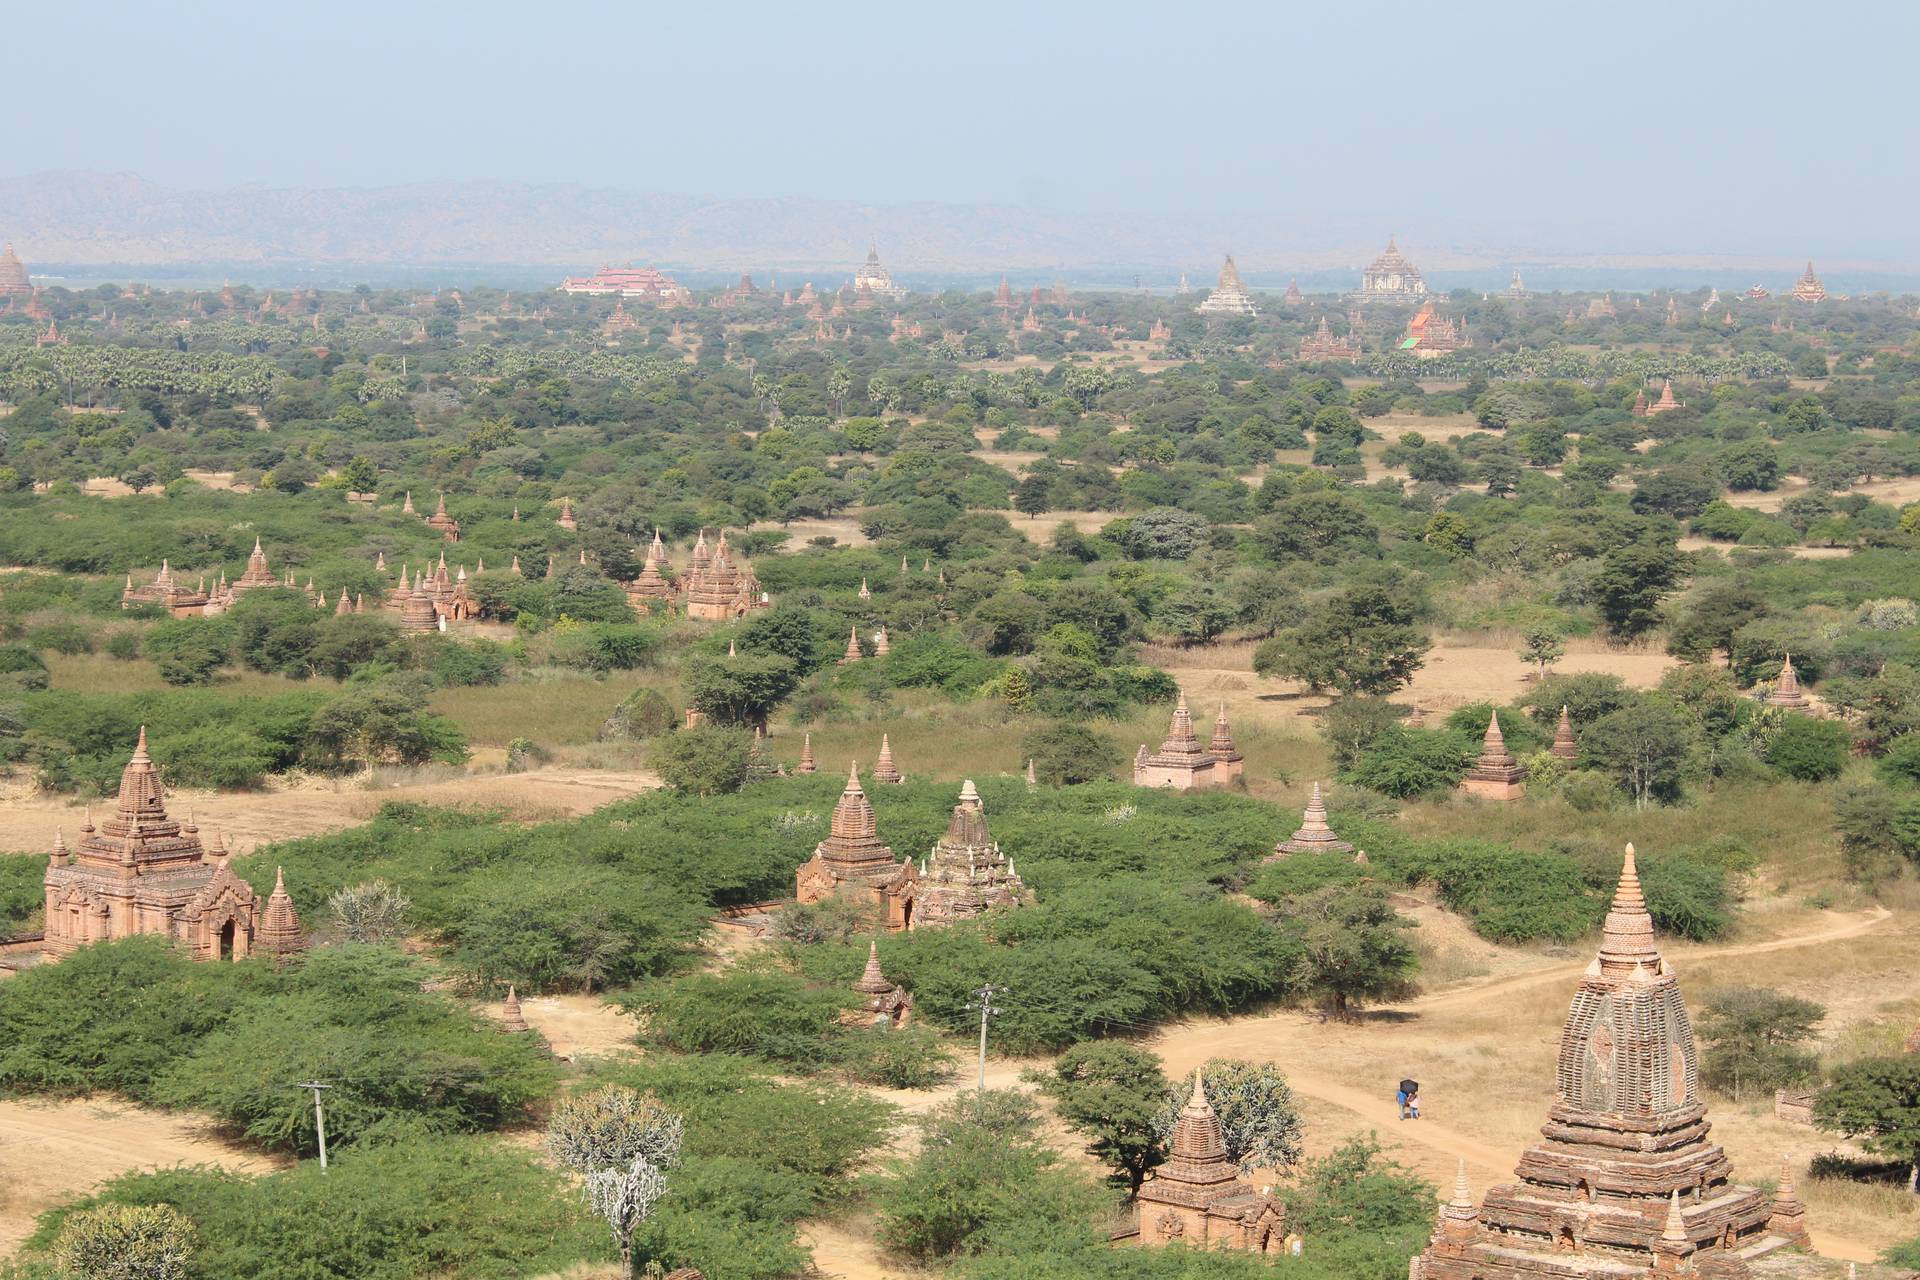 Once there were 10 000 temples and pagodas across the Bagan plain, which were built between the ninth and 13th centuries to honour the deities. Now there are only 2 800, but it’s still ranked as one of the world’s most remarkable archaeological sites.